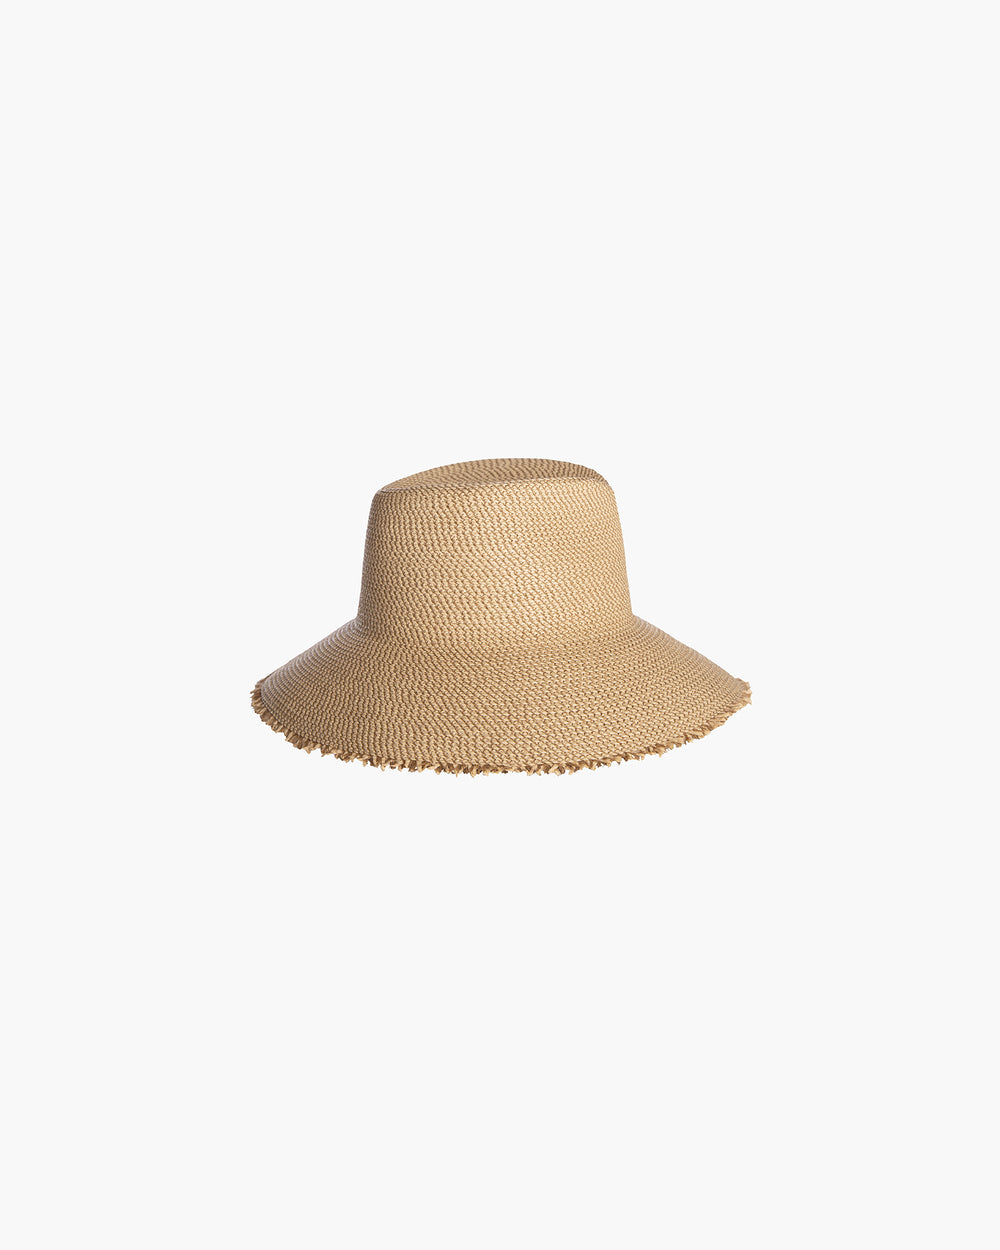 Squishee® A List｜Packable Fedora Hat ｜Eric Javits